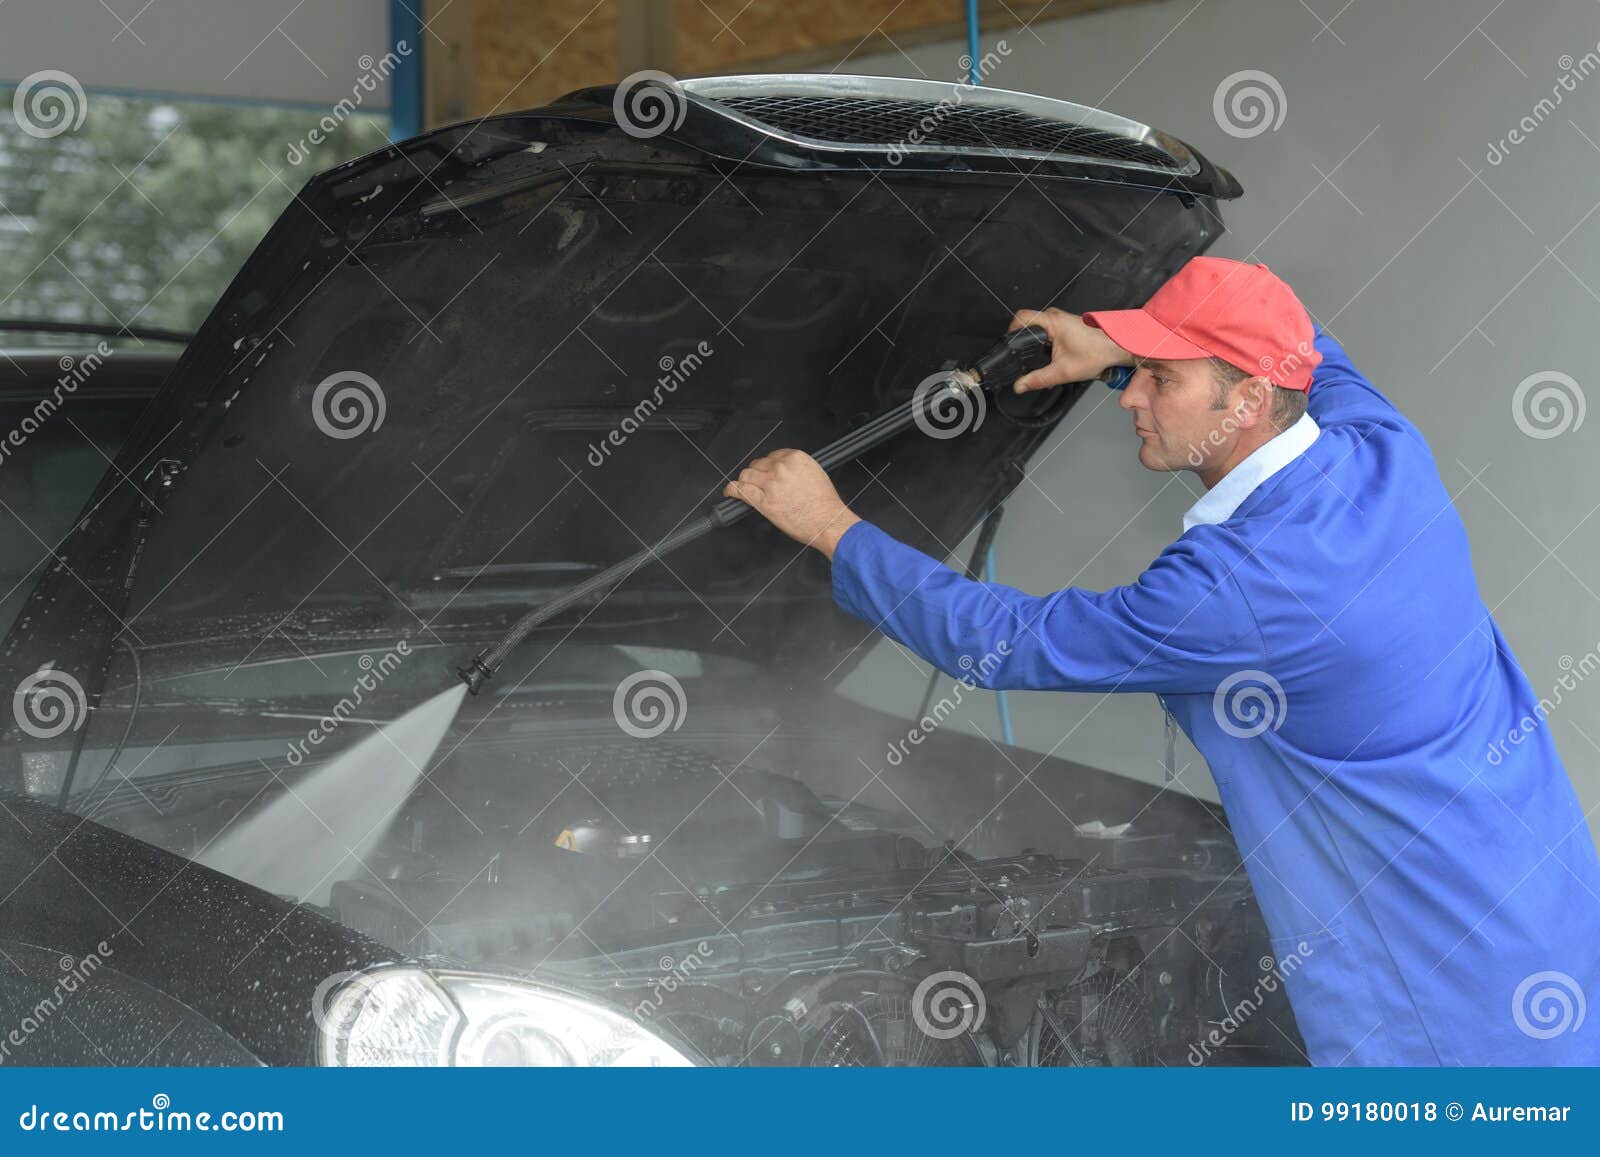 image worker cleaning cars engine with karcher